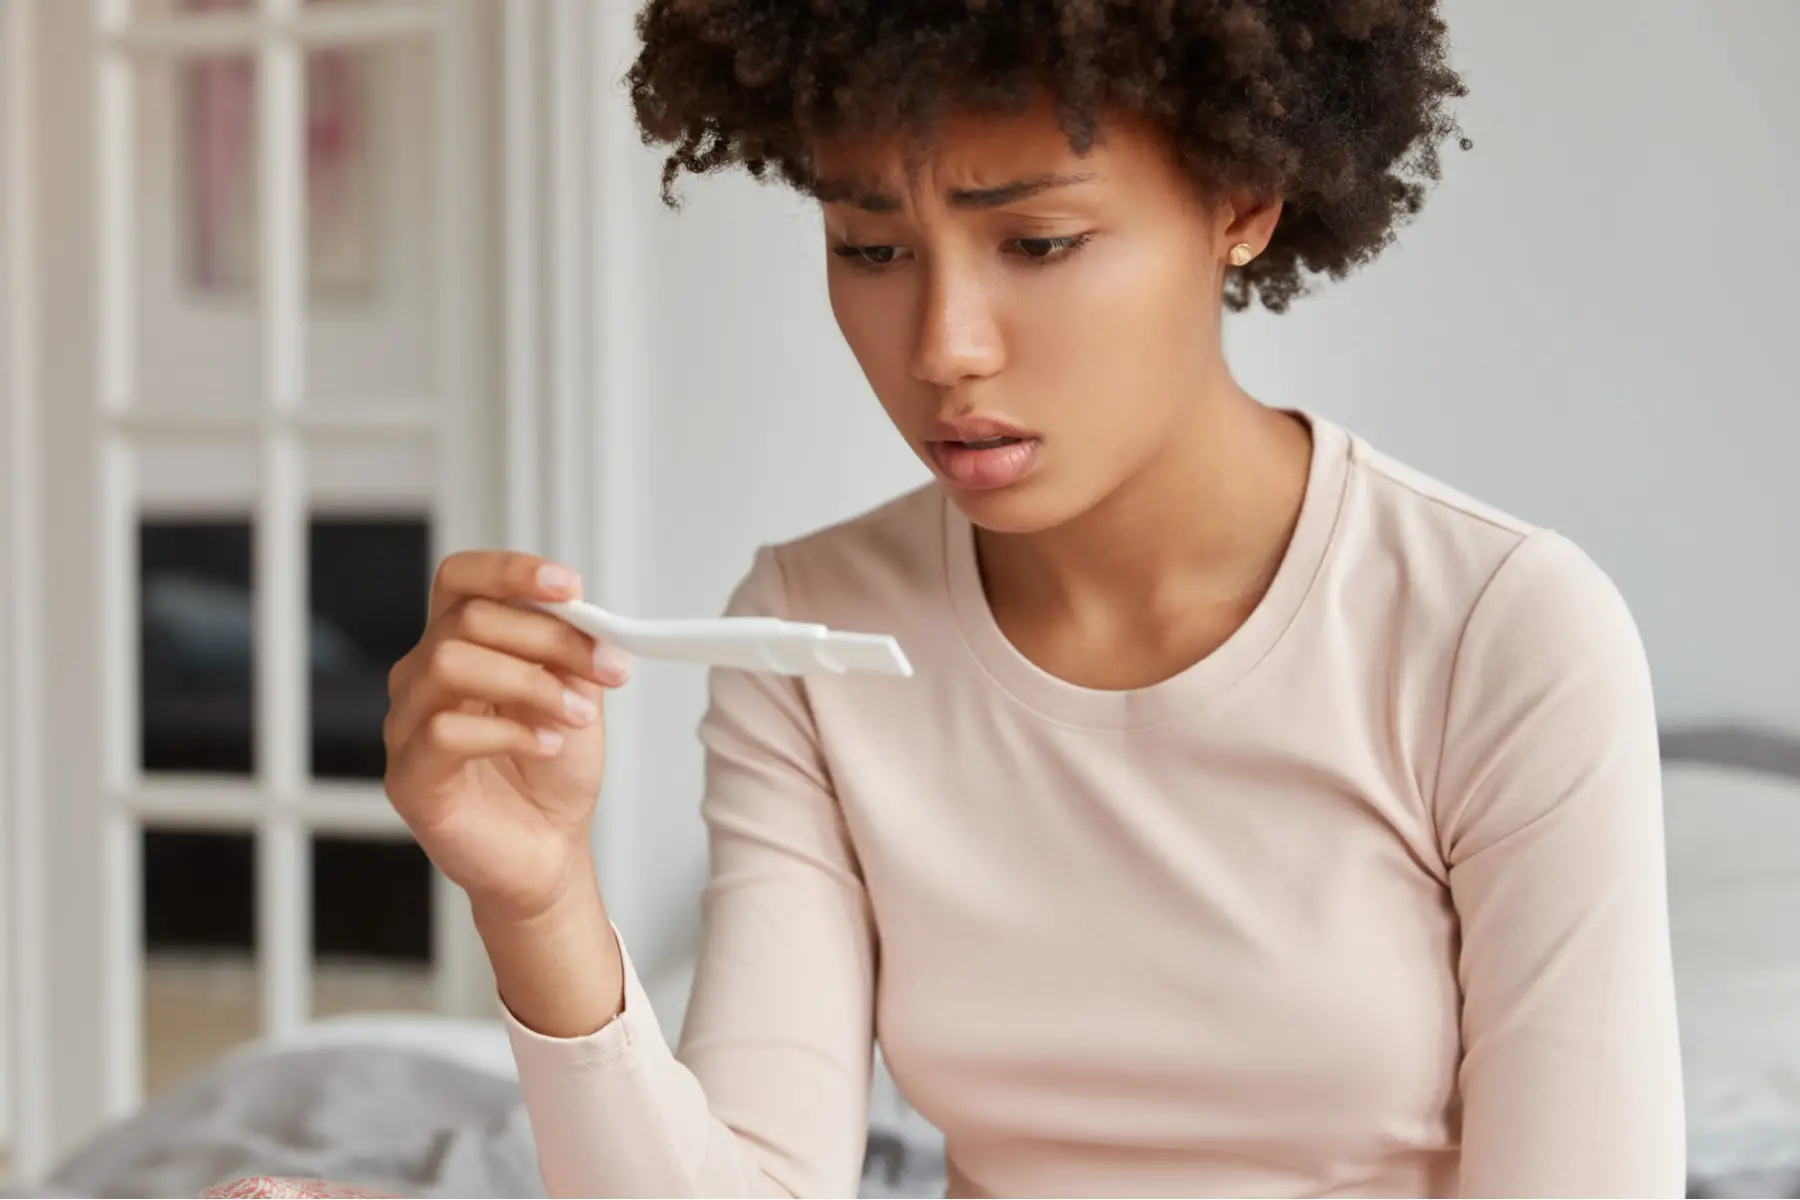 Woman looking concerned at pregnancy test; unwanted pregnancy